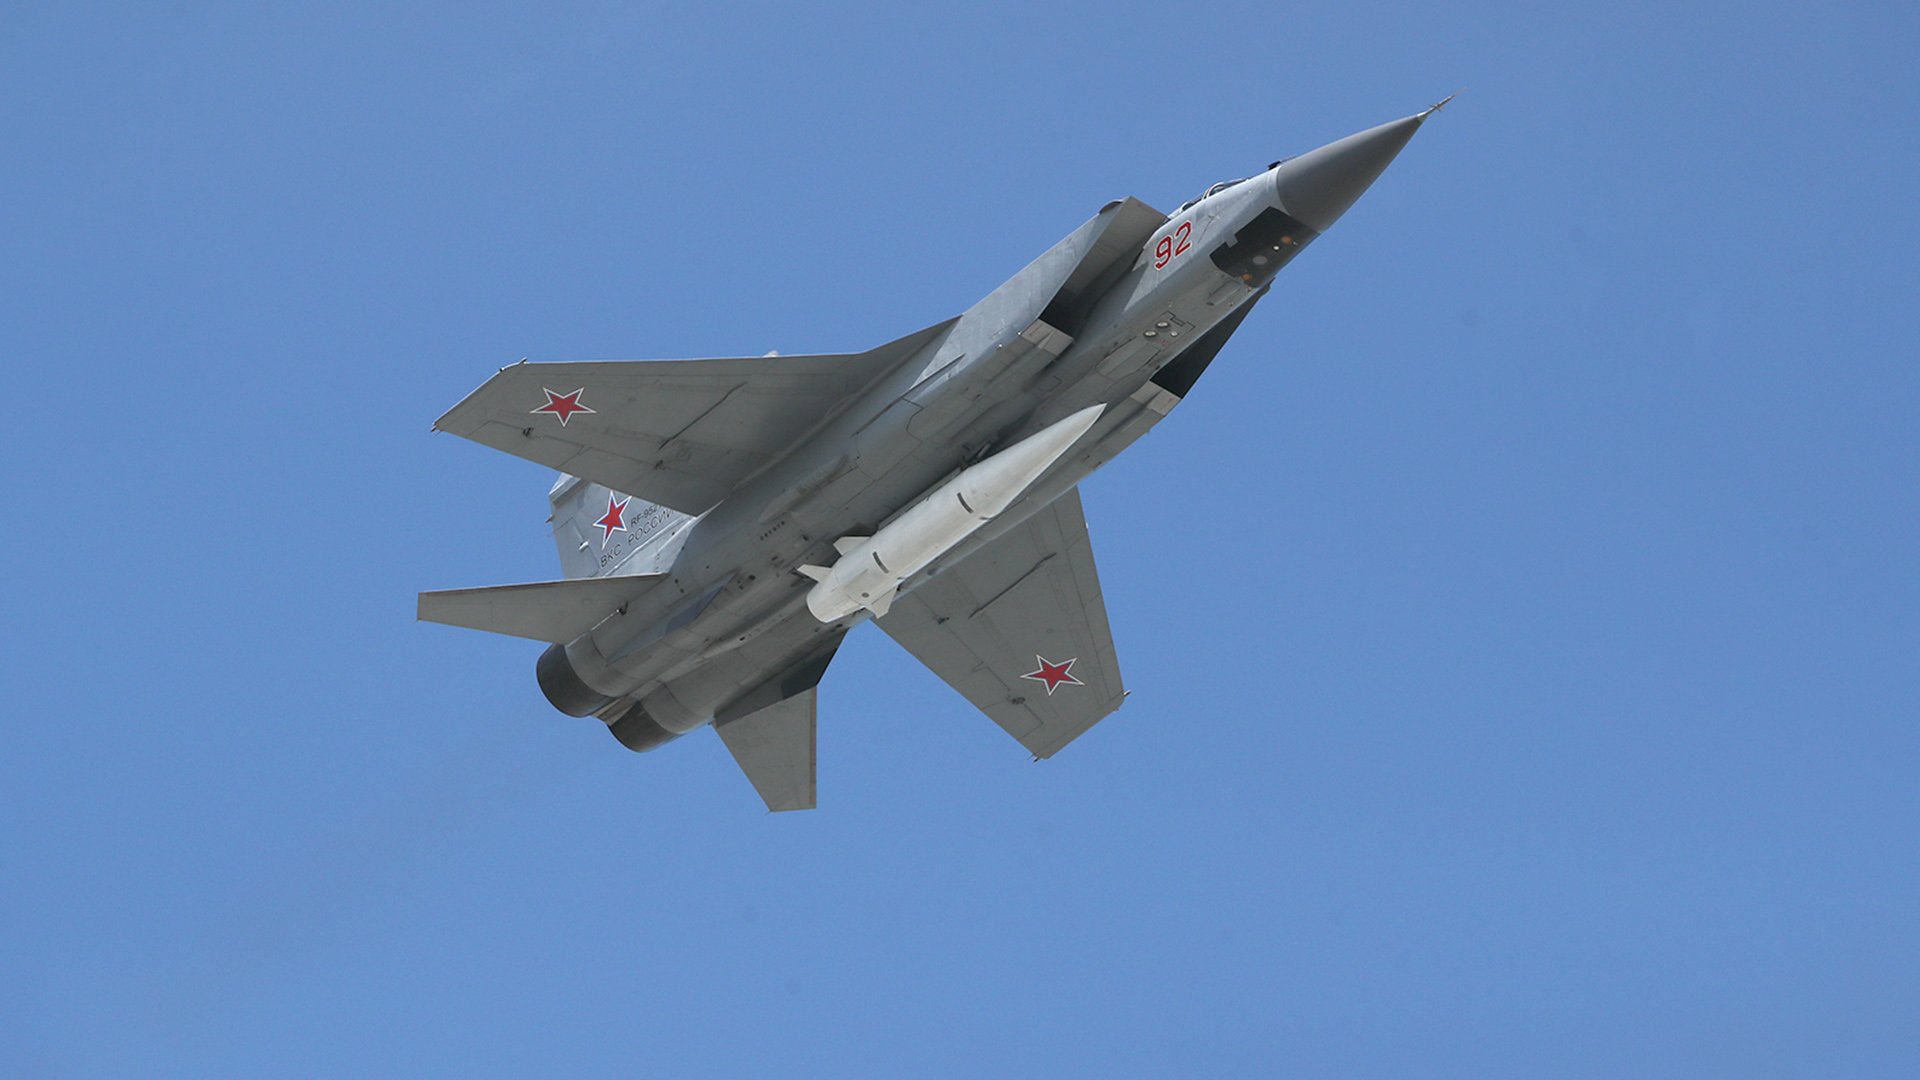 MiG-31K fighter, which can carry hypersonic rockets "Dagger", caught fire in Belarus